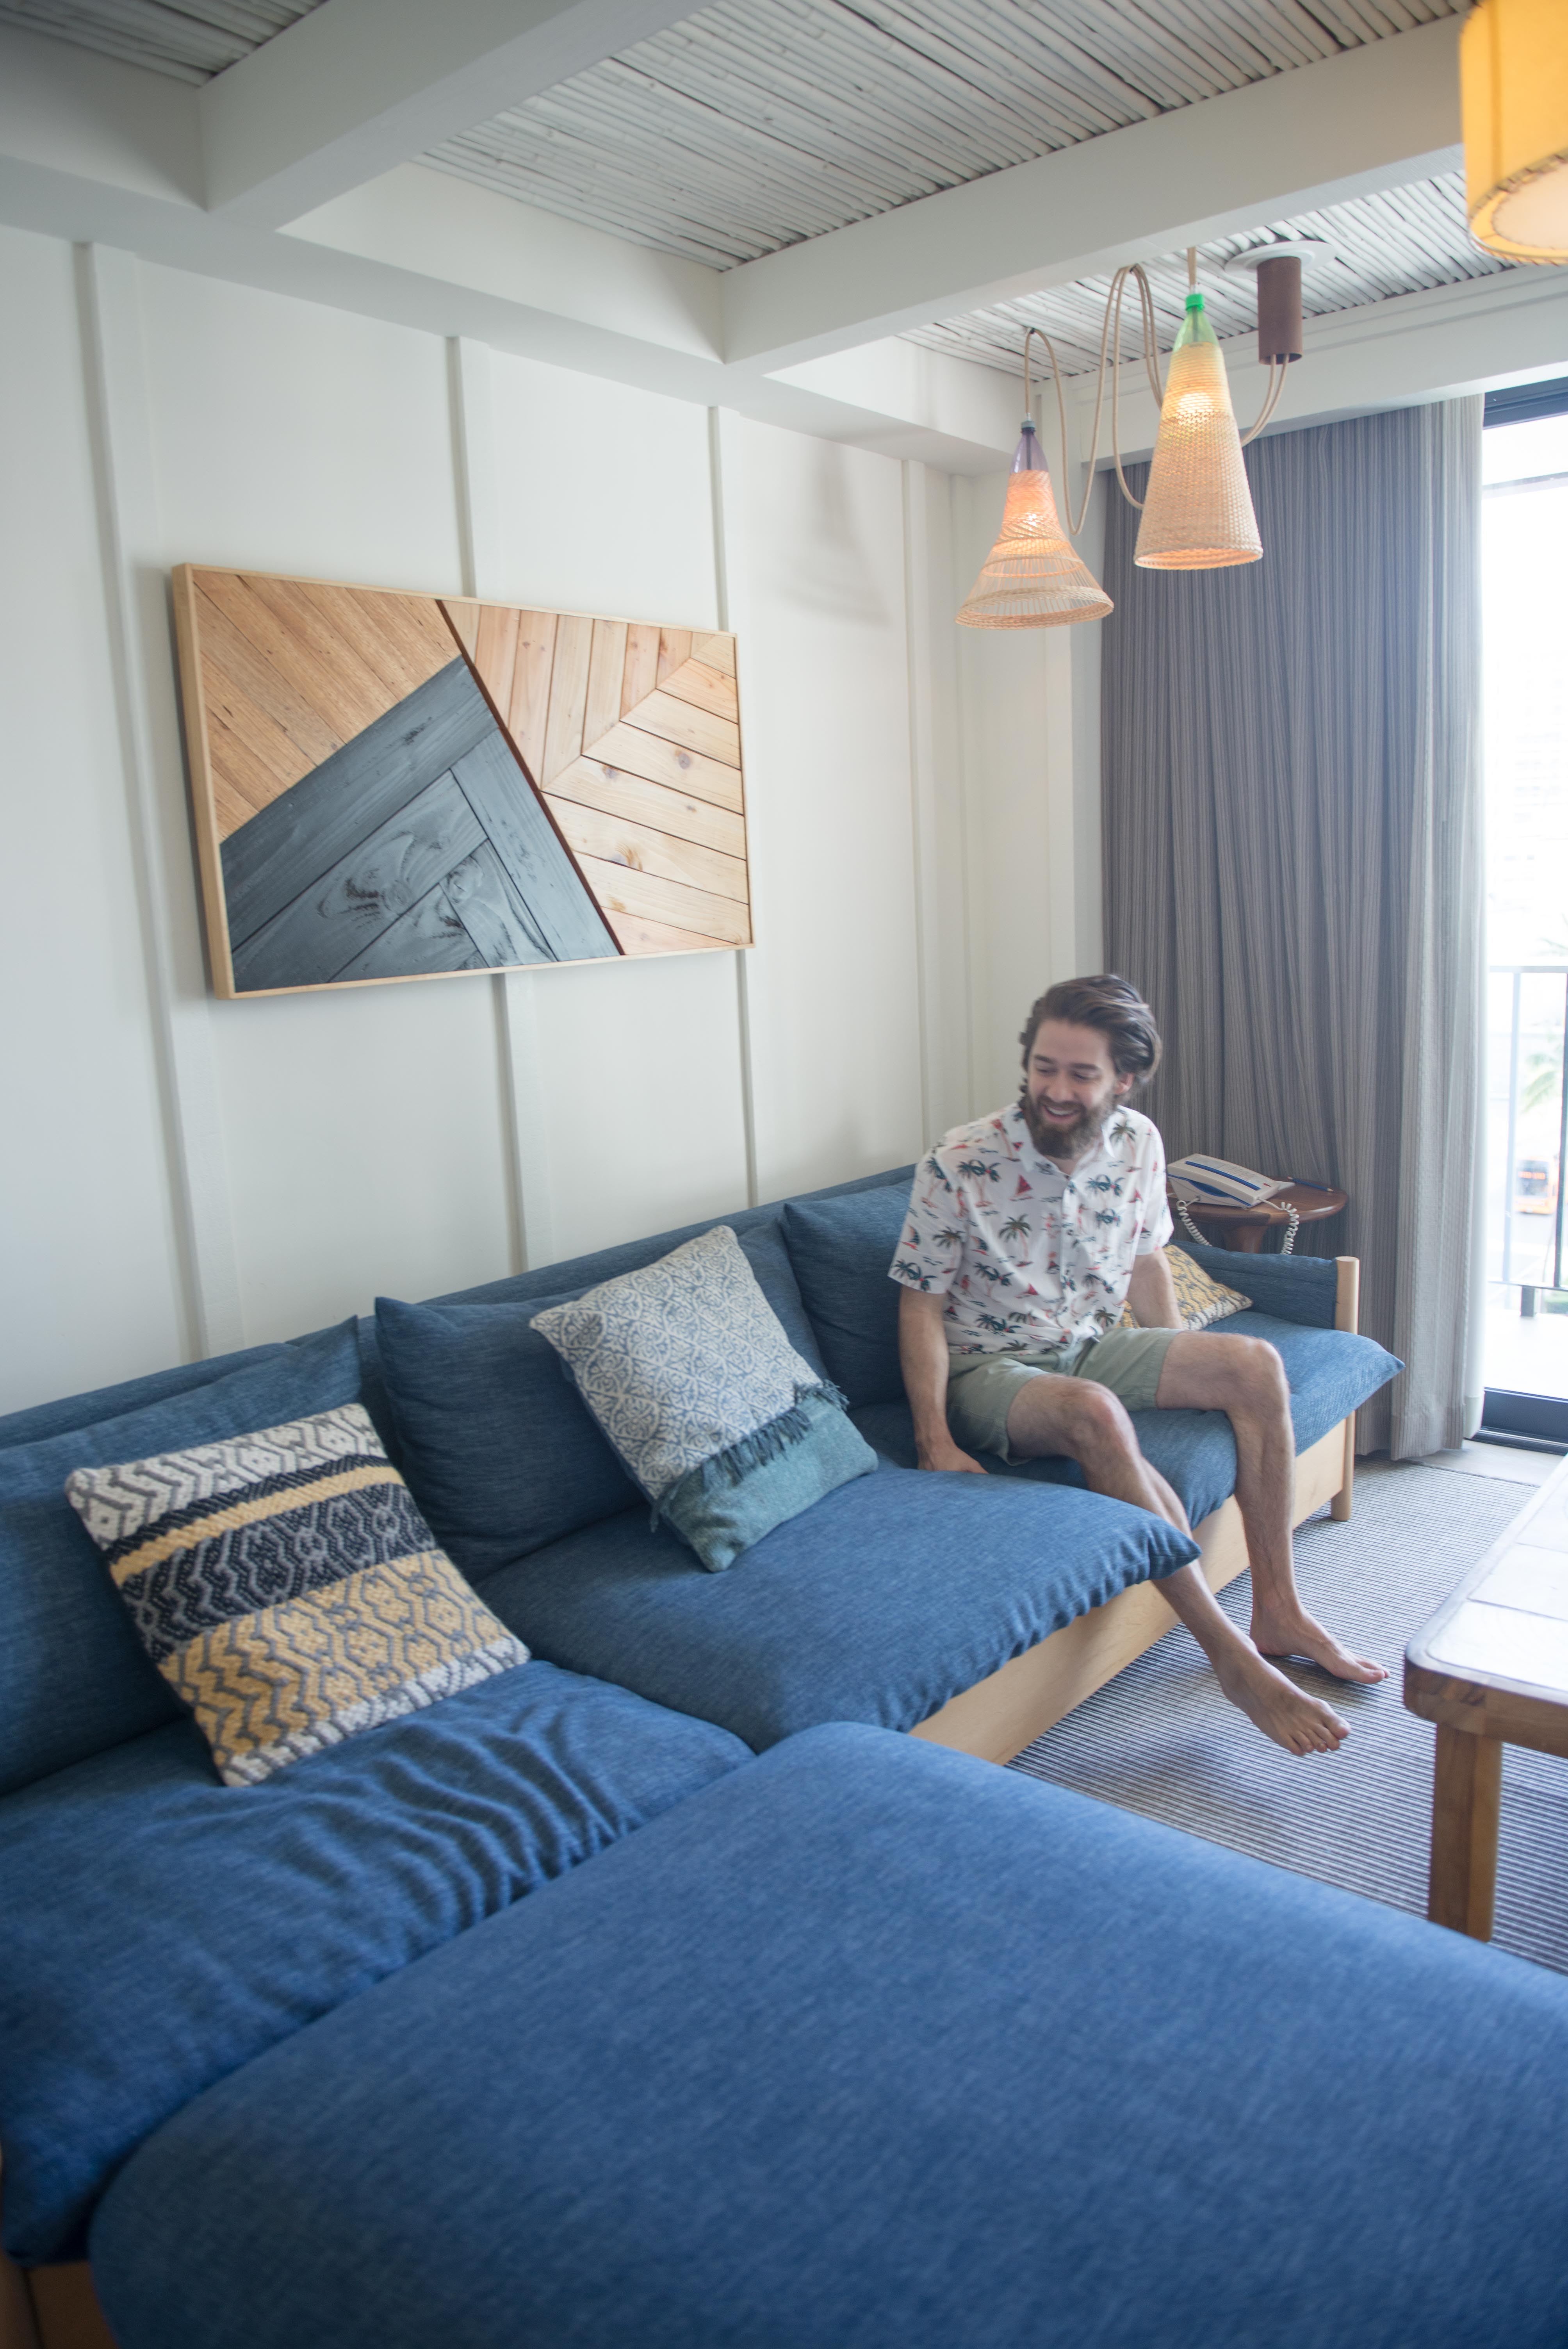 Places to Stay in Oahu, Hawaii: The Surfjack Hotel - living room #camandtay #camlee